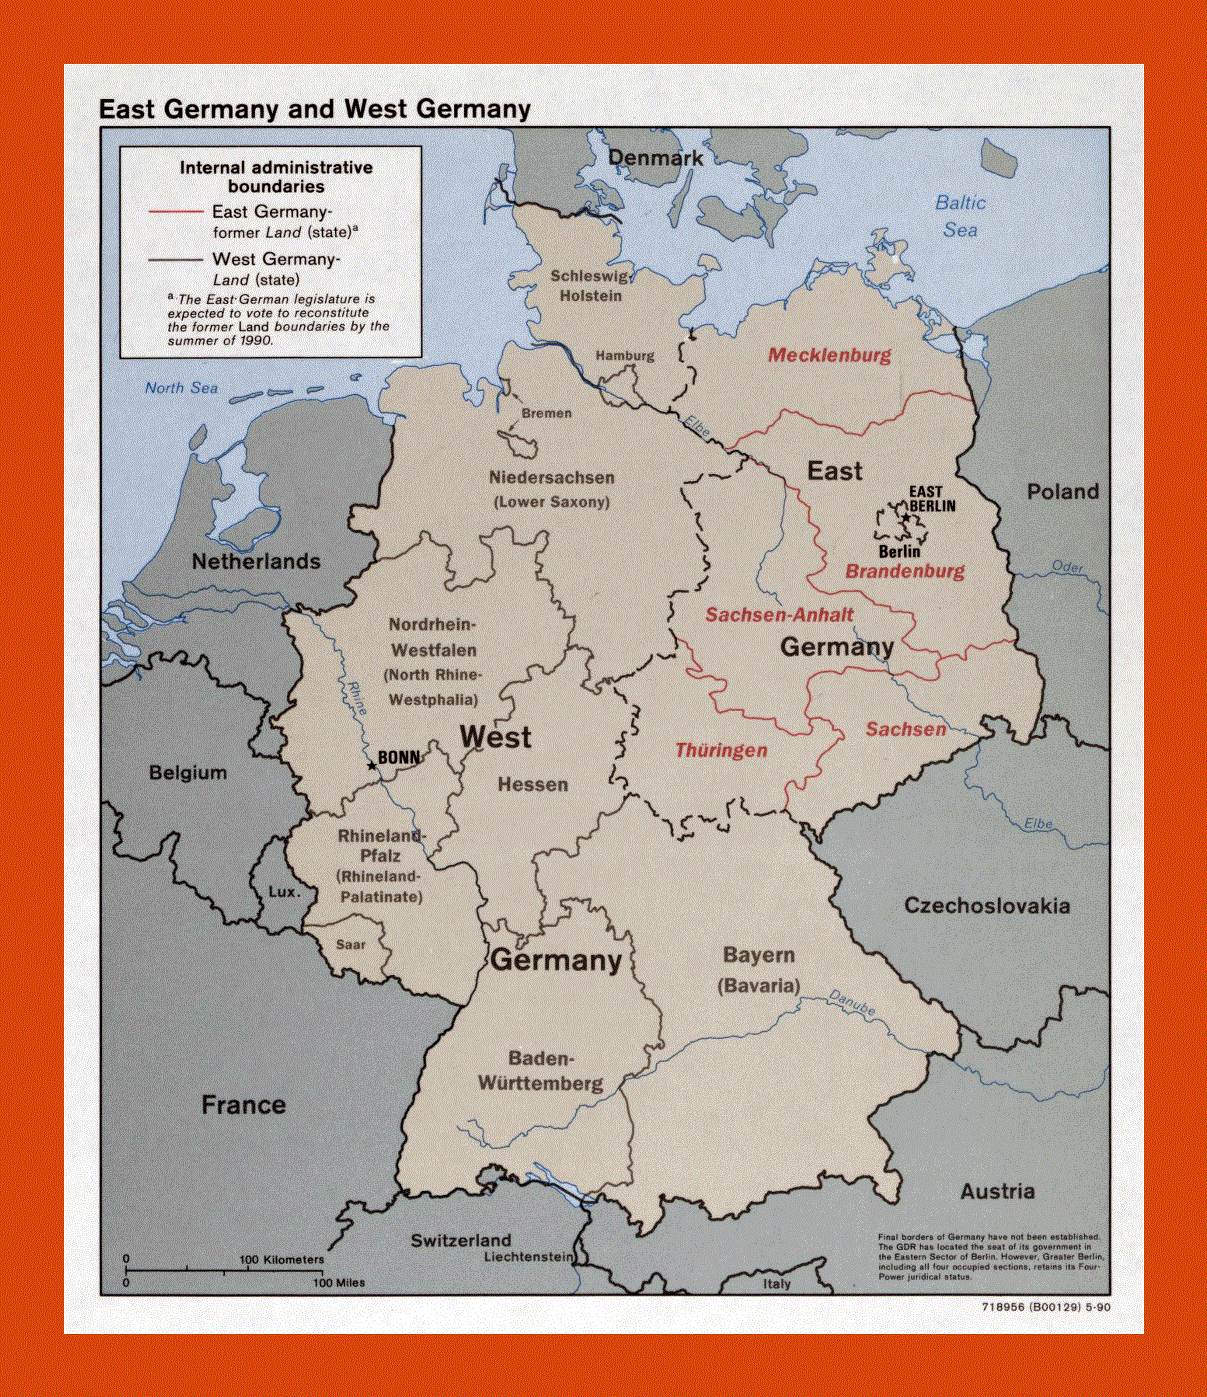 Political and administrative map of East Germany and West Germany - 1990